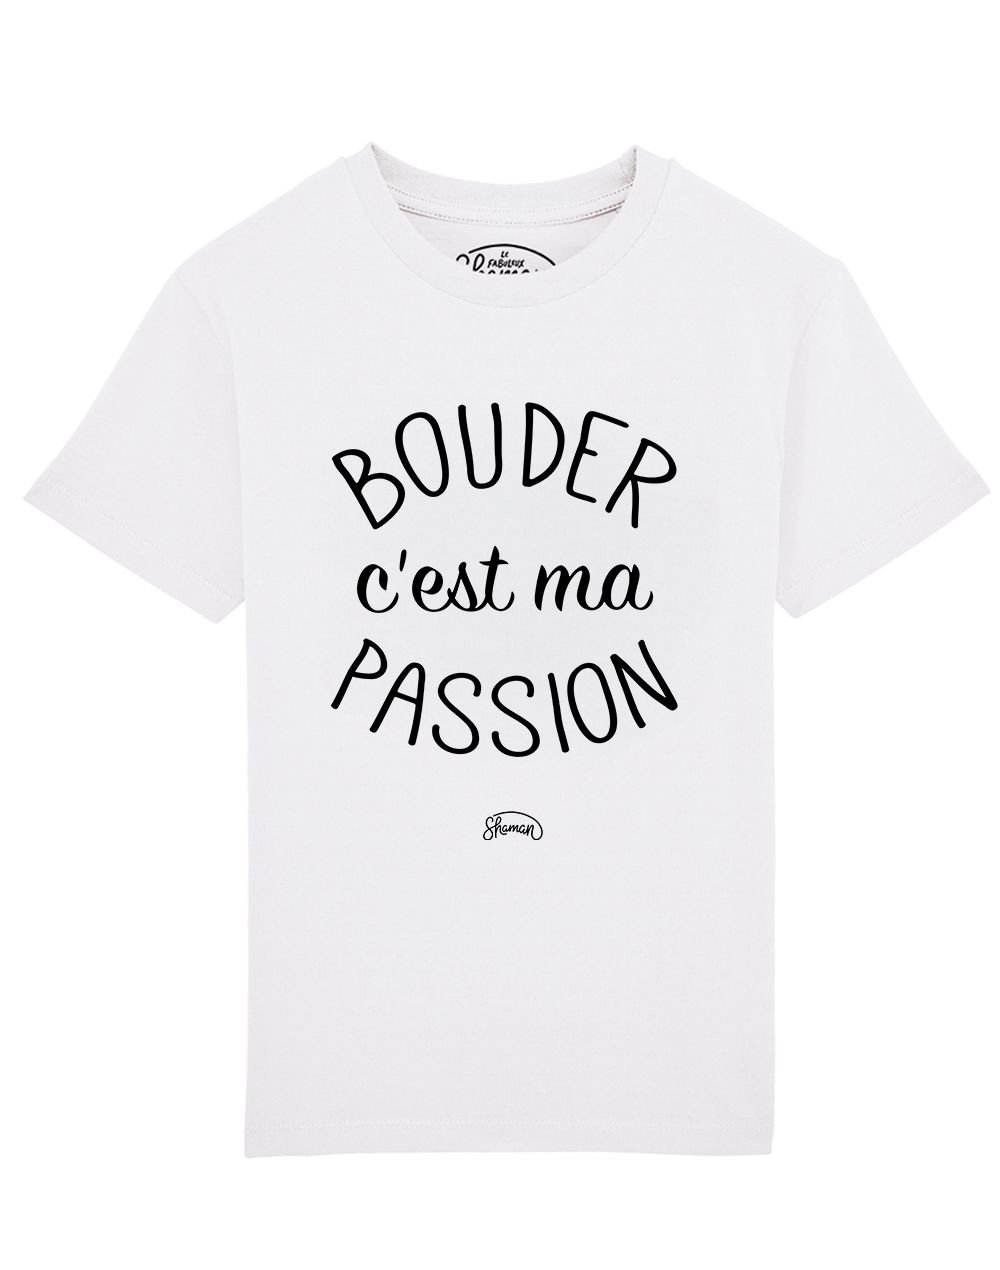 Tee shirt Bouder passion